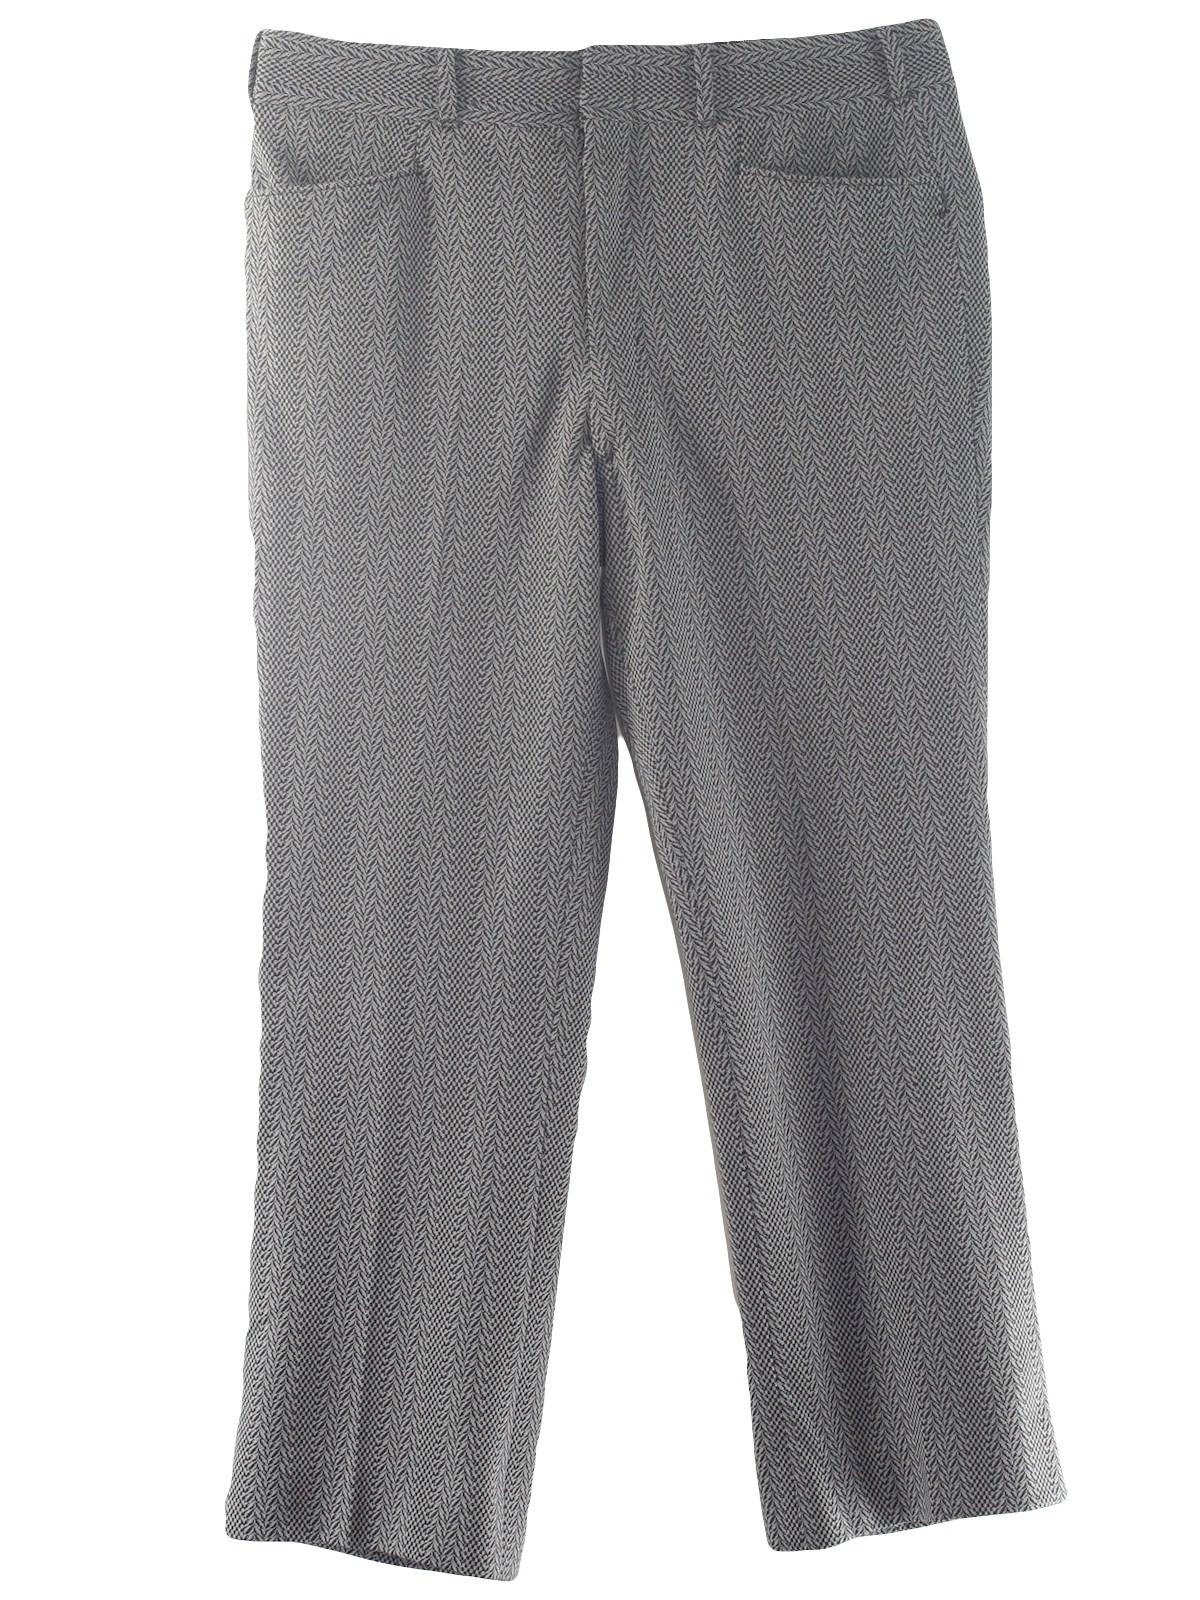 Retro Seventies Pants: Late 70s -Missing Label- Mens dark grey and off ...